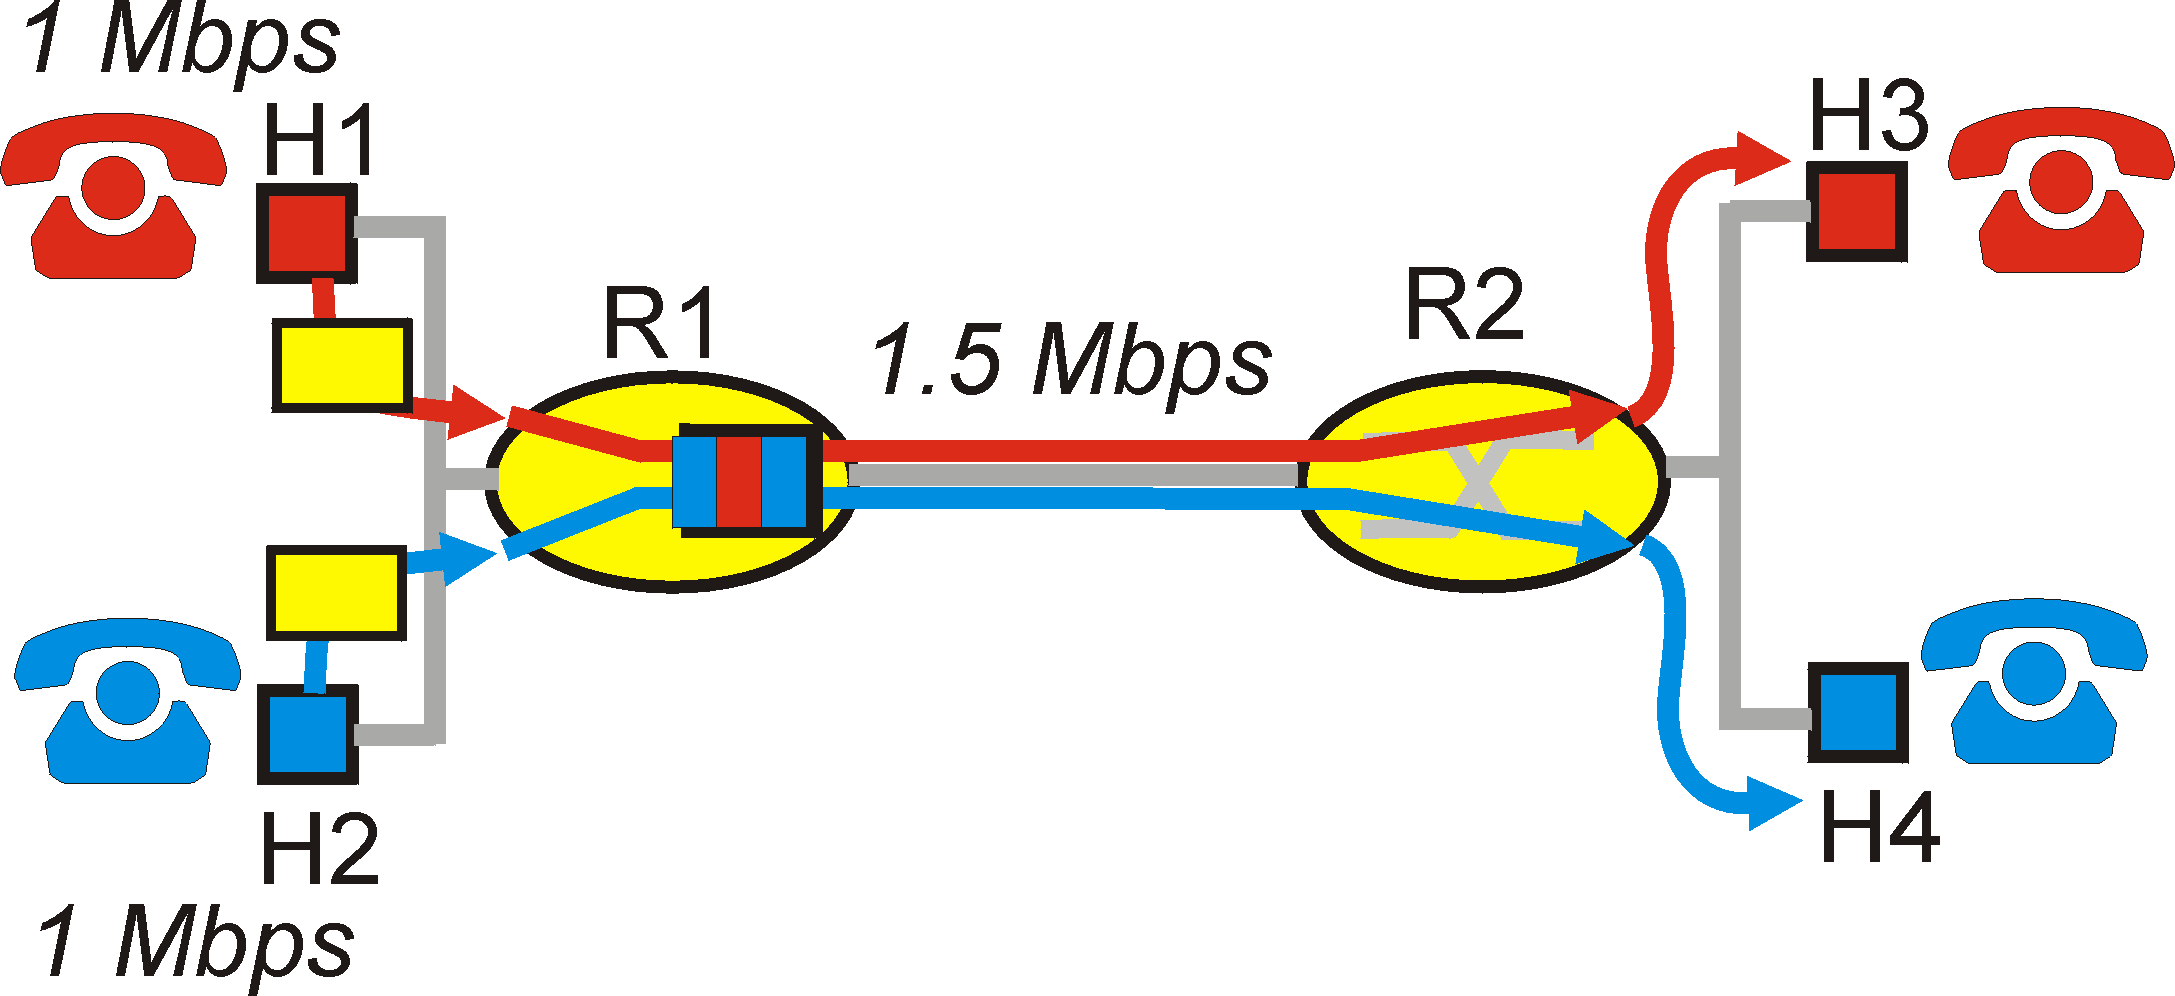 Two competing audio applications overloading the R1-to-R2 link